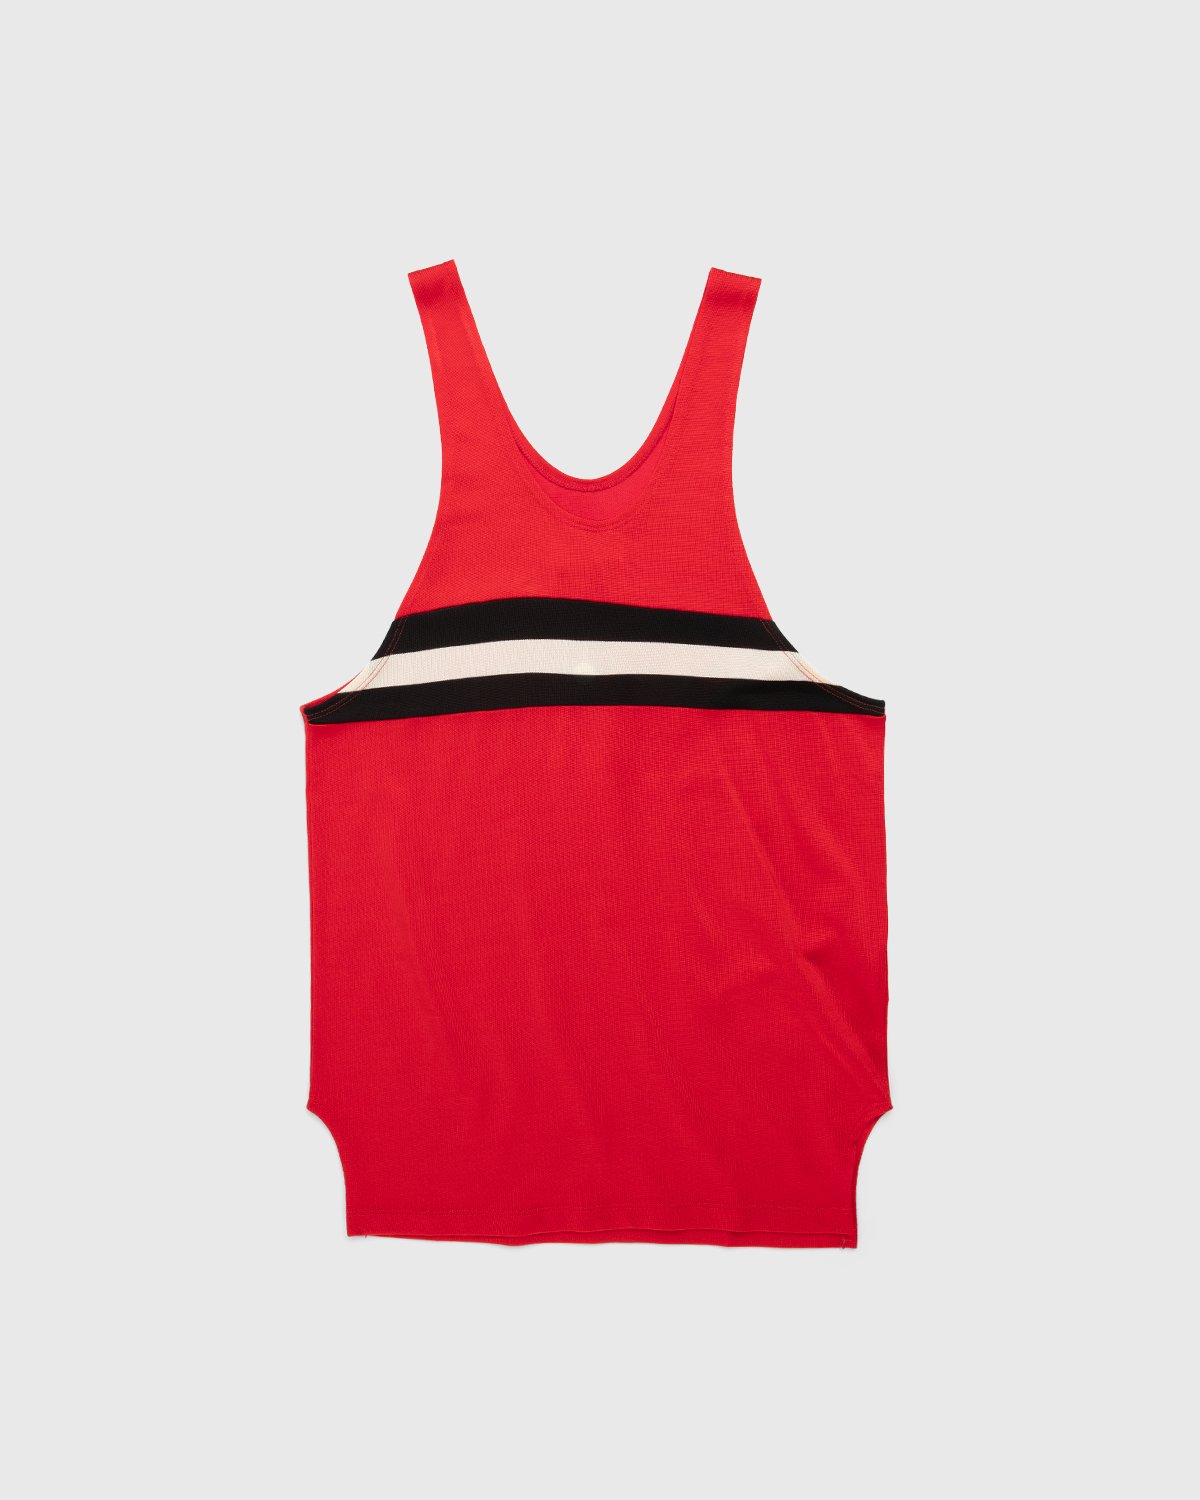 Maison Margiela - Tank Top Red - Clothing - Red - Image 1